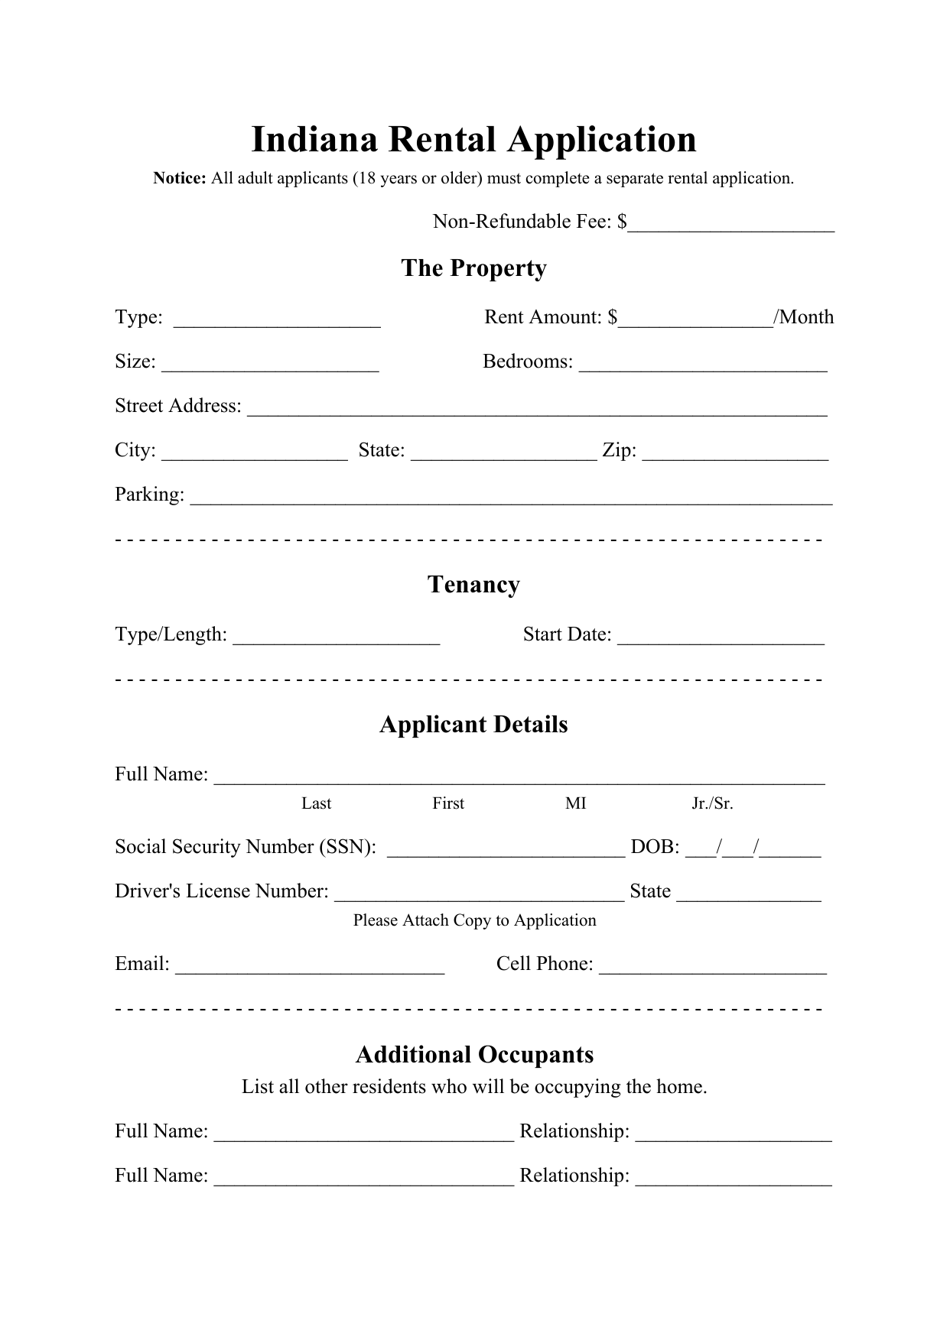 indiana-rental-application-form-fill-out-sign-online-and-download